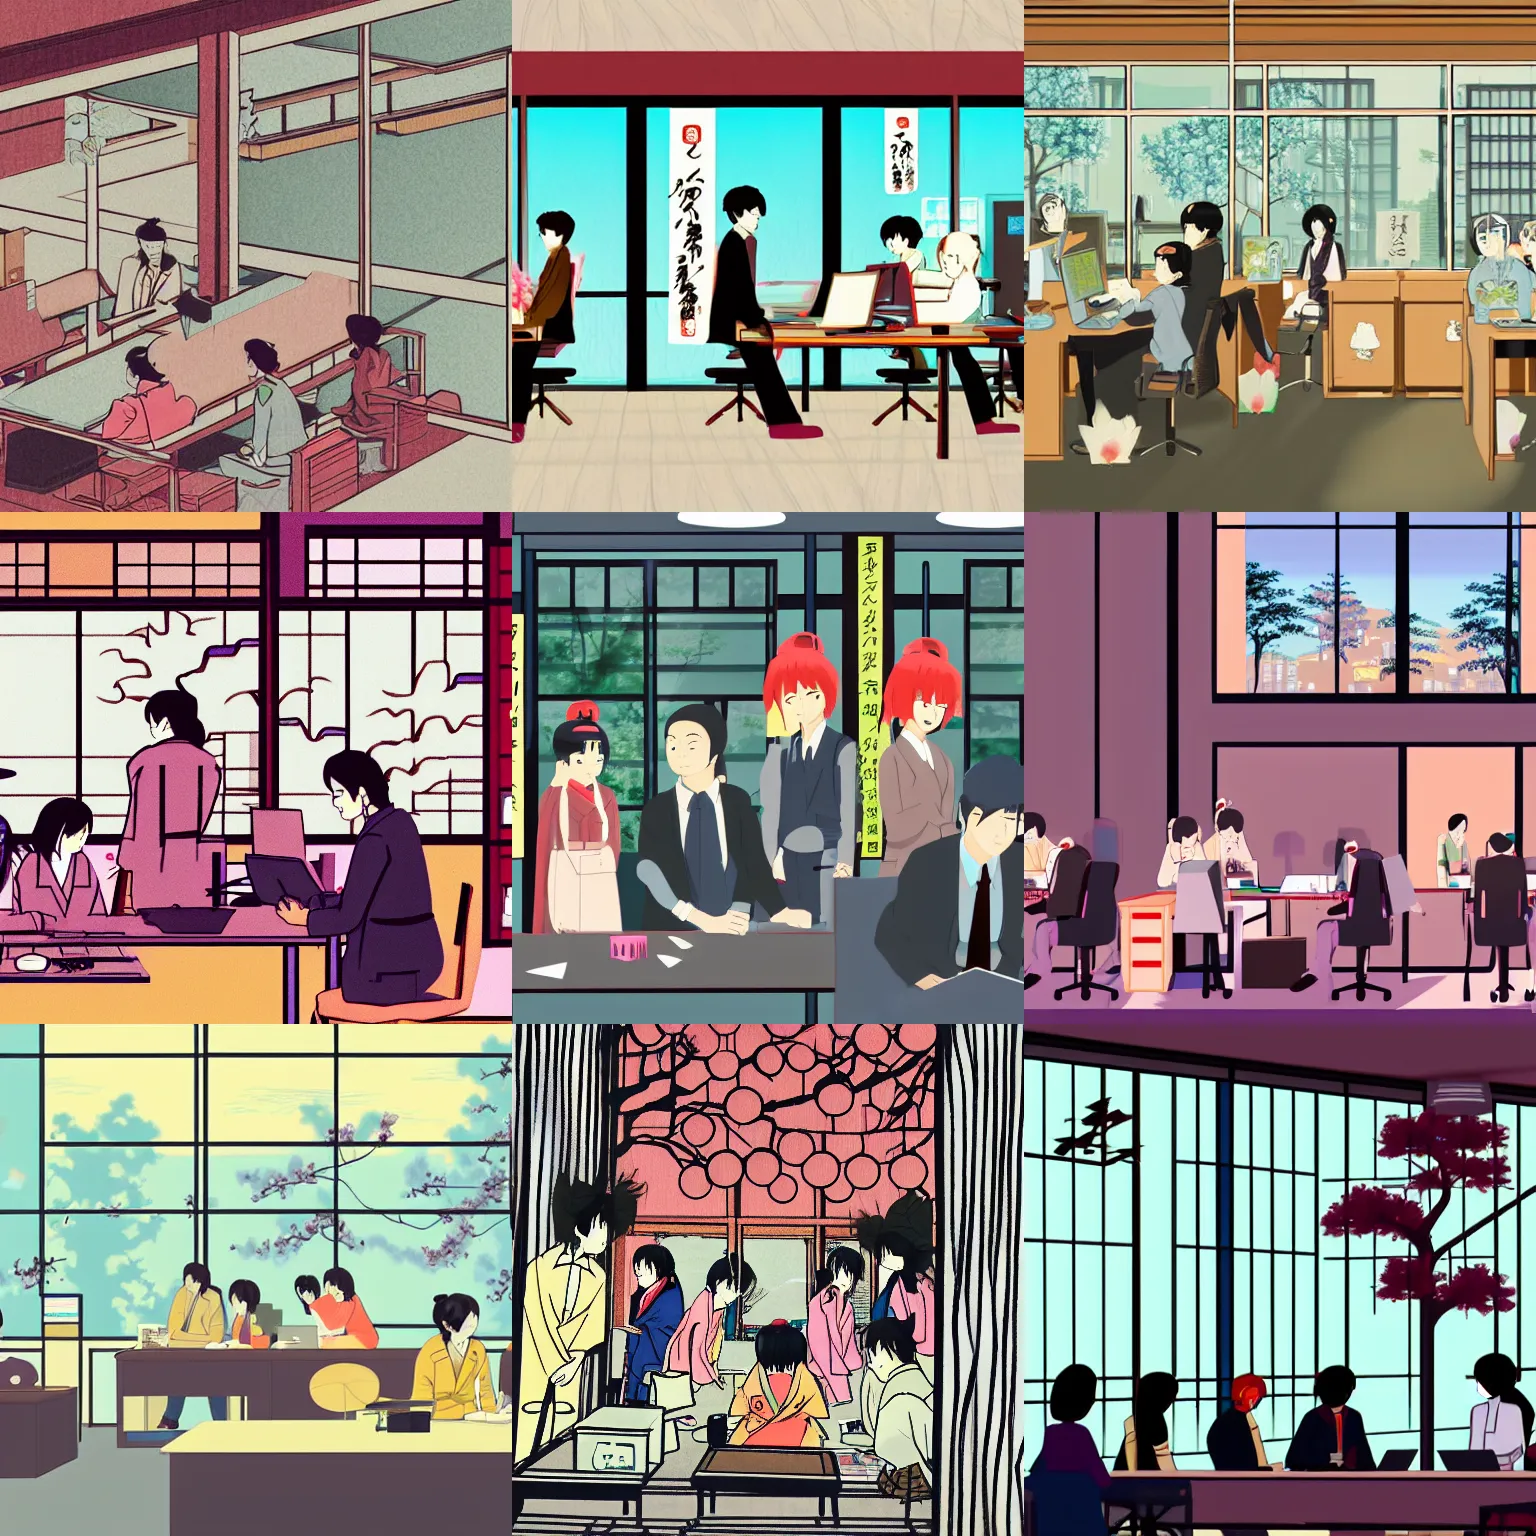 Prompt: a group of yokai in a modern japanese office, alongside human office workers. sakura trees can be seen through window. late afternoon light. anime style art.